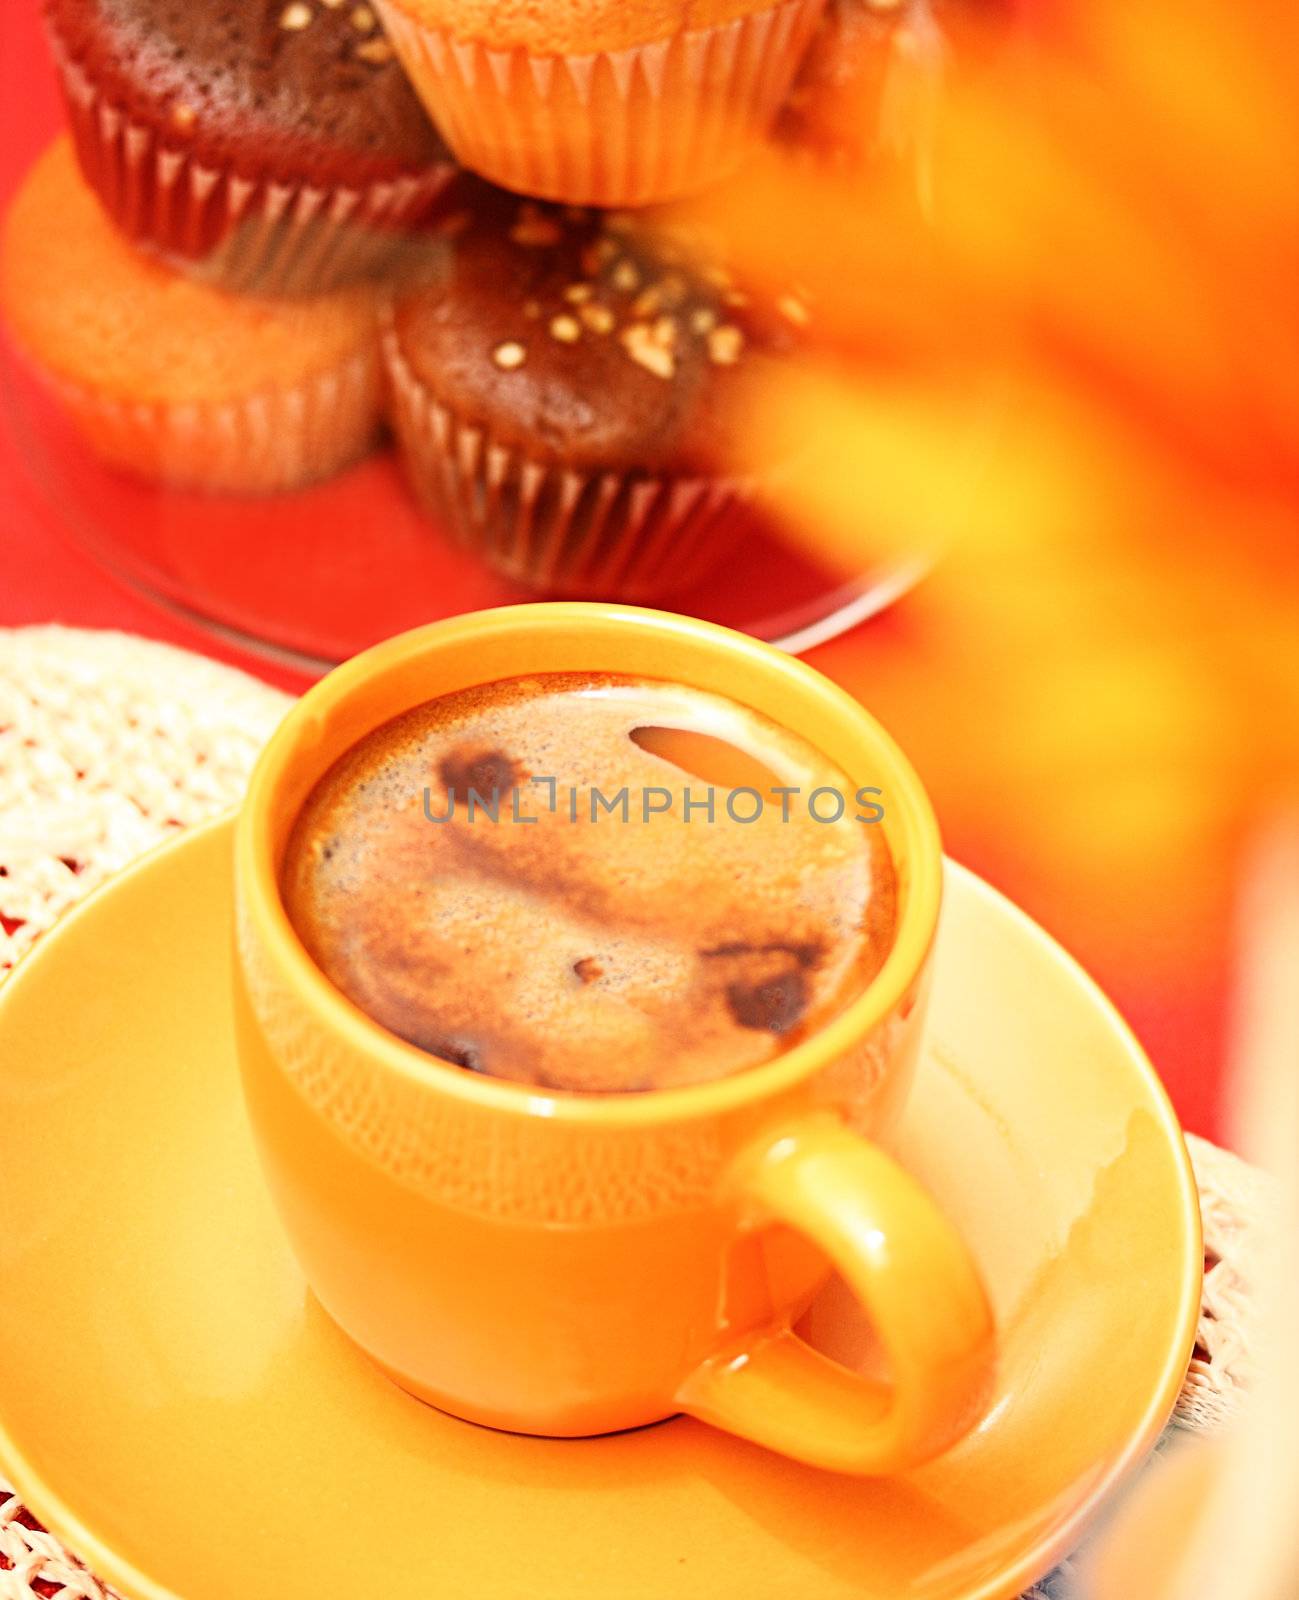 Cup Of Coffee And Some Cupcakes For Afternoon Snack